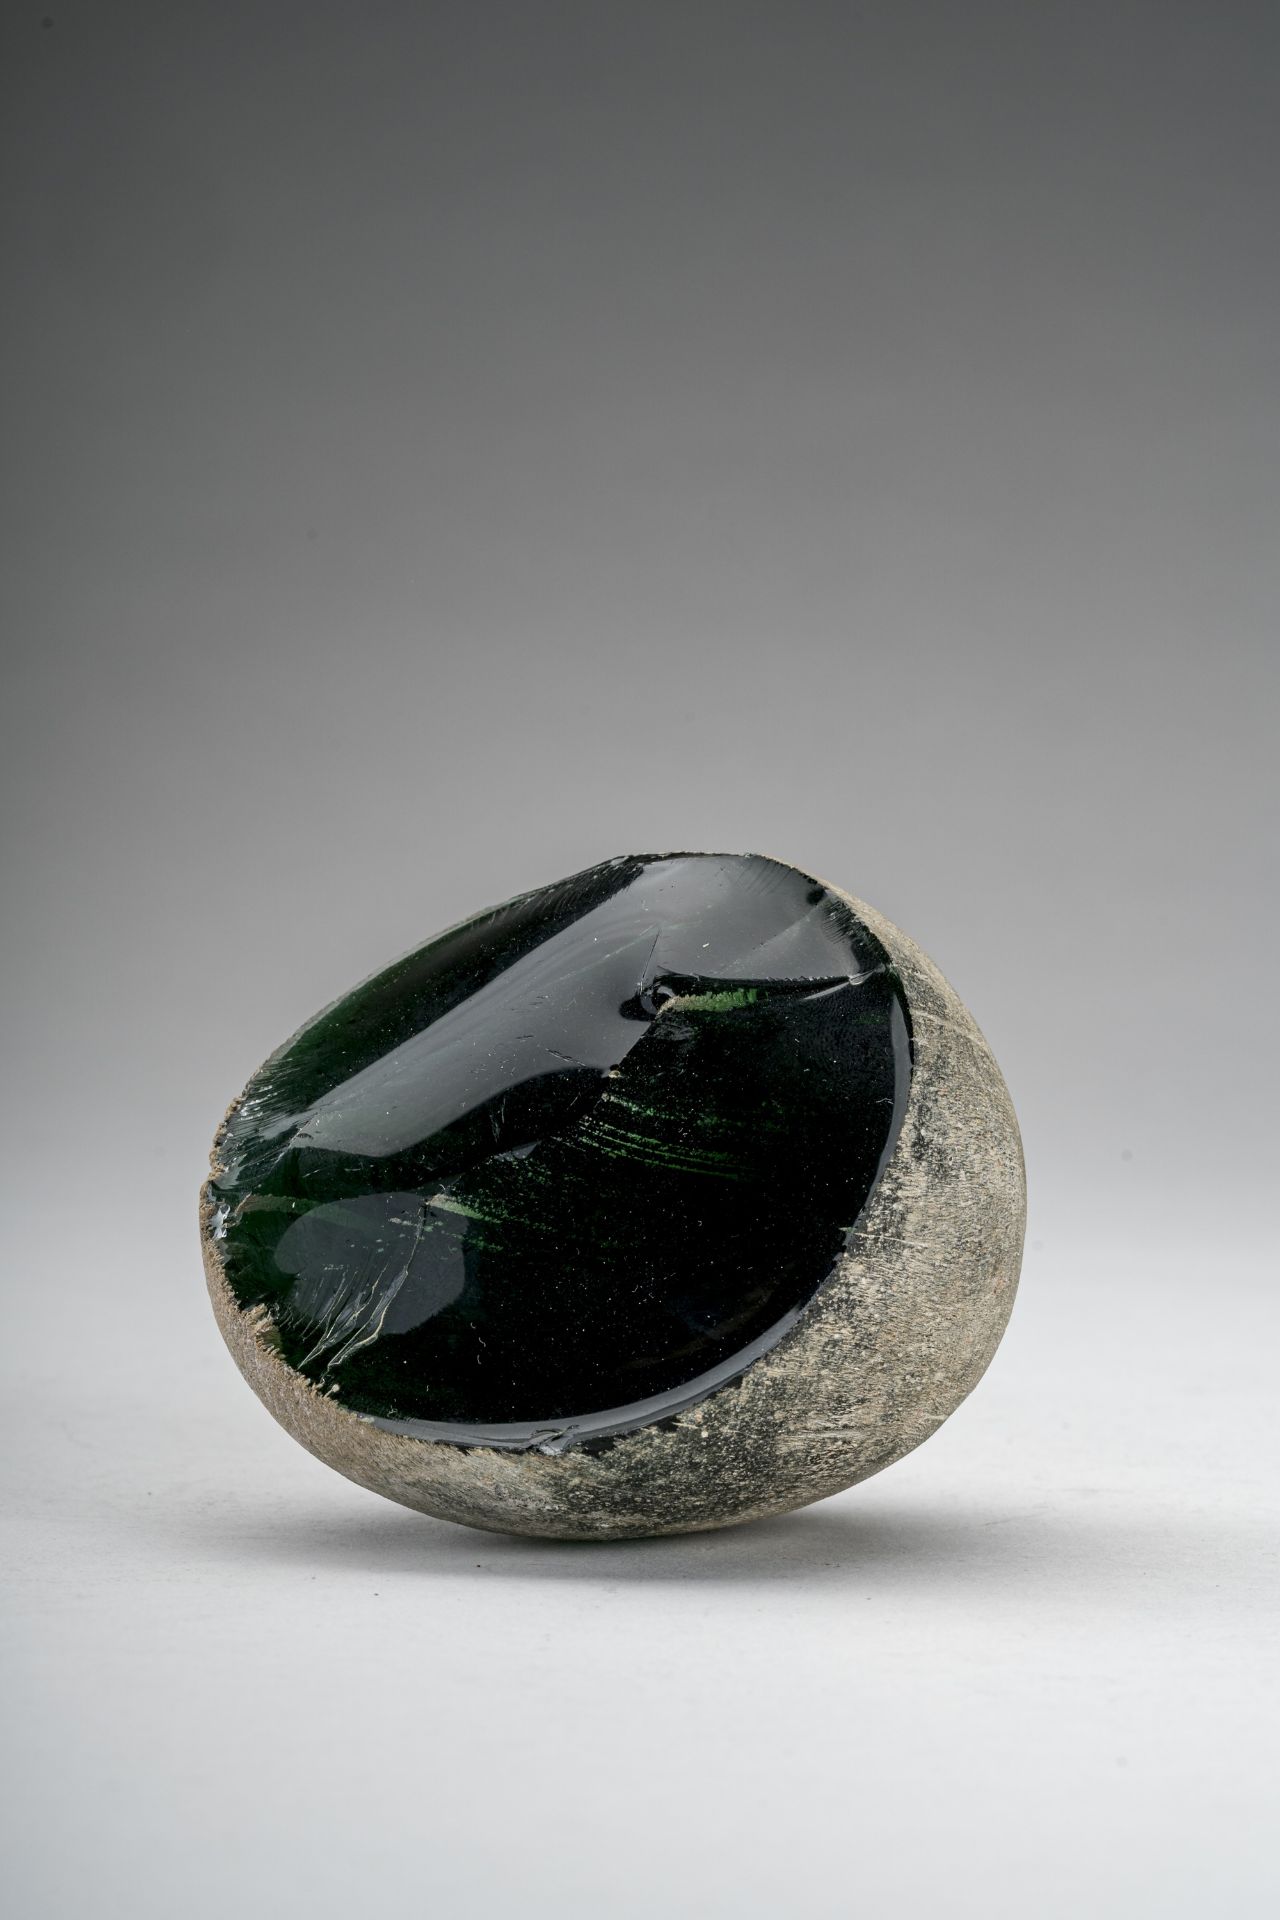 A TRANSLUCENT GREEN GLASS 'COSMIC EGG', HAN DYNASTY - Image 6 of 8